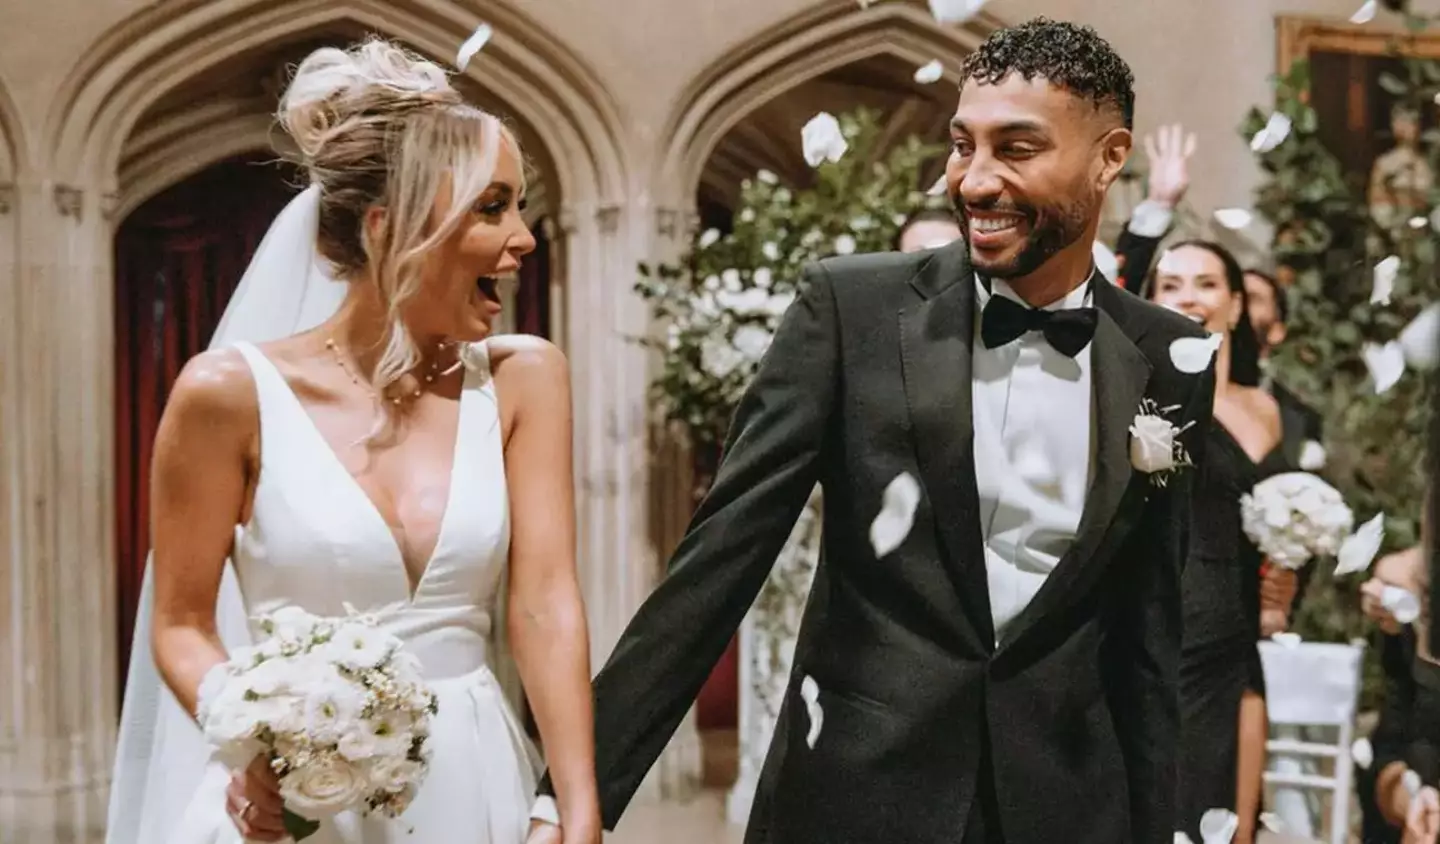 Nathanial Valentine was paired up with Ella Morgan on Married At First Sight UK.